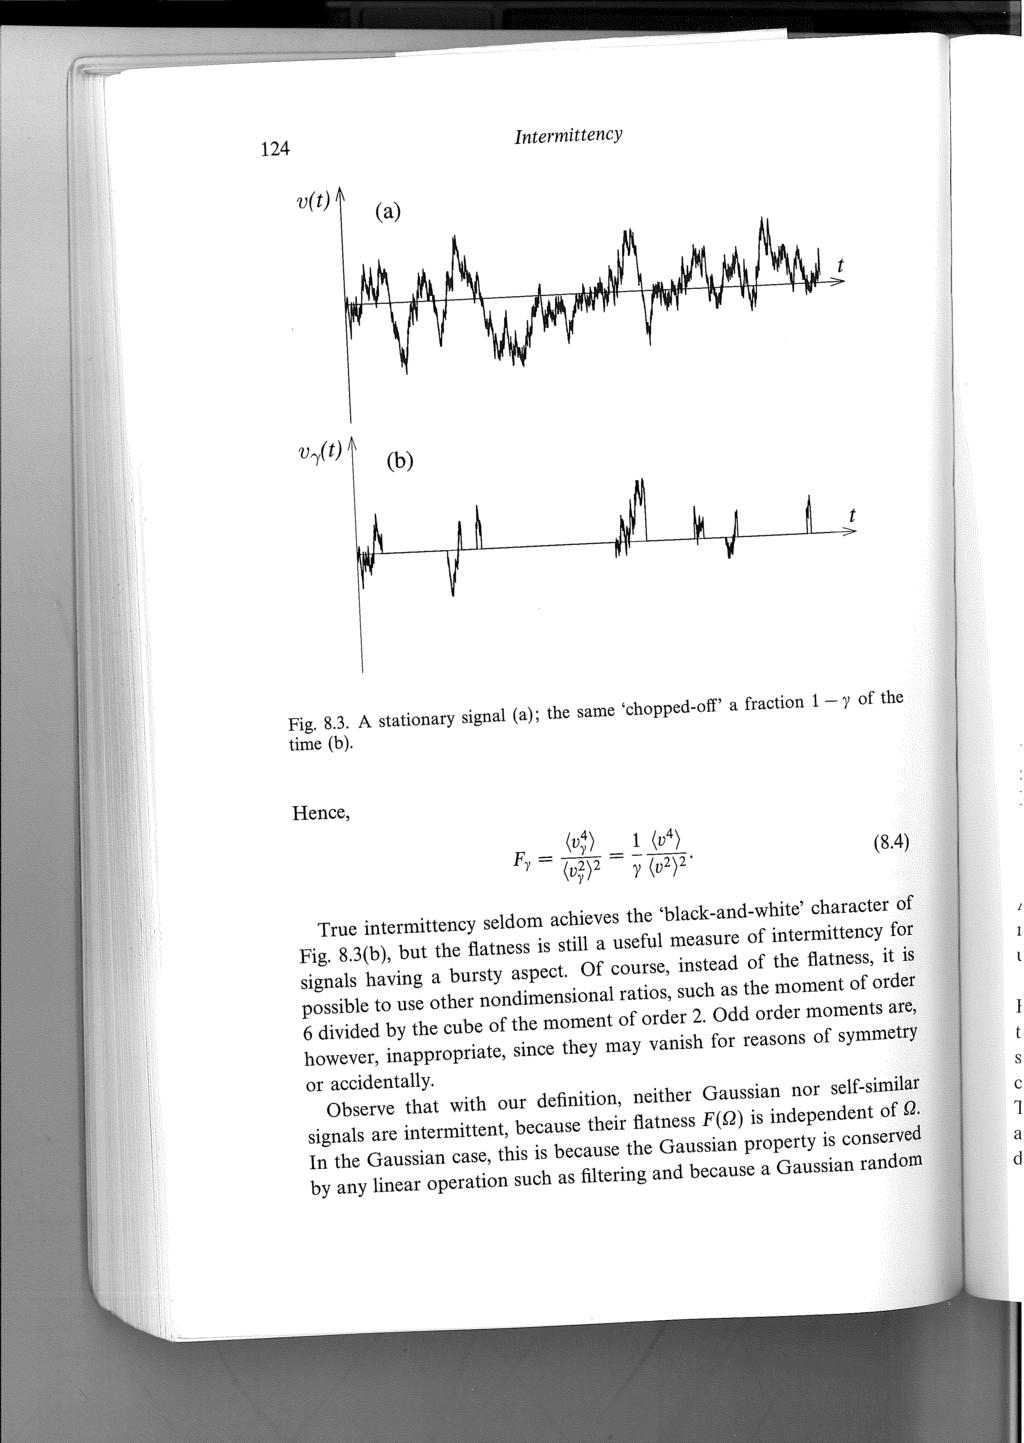 4 How to measure Intermittency Flatness or Kurtosis : F = u4 u2 2. Measures the relative fluctuations of fluctuations. Example from Frisch (CUP 1995).